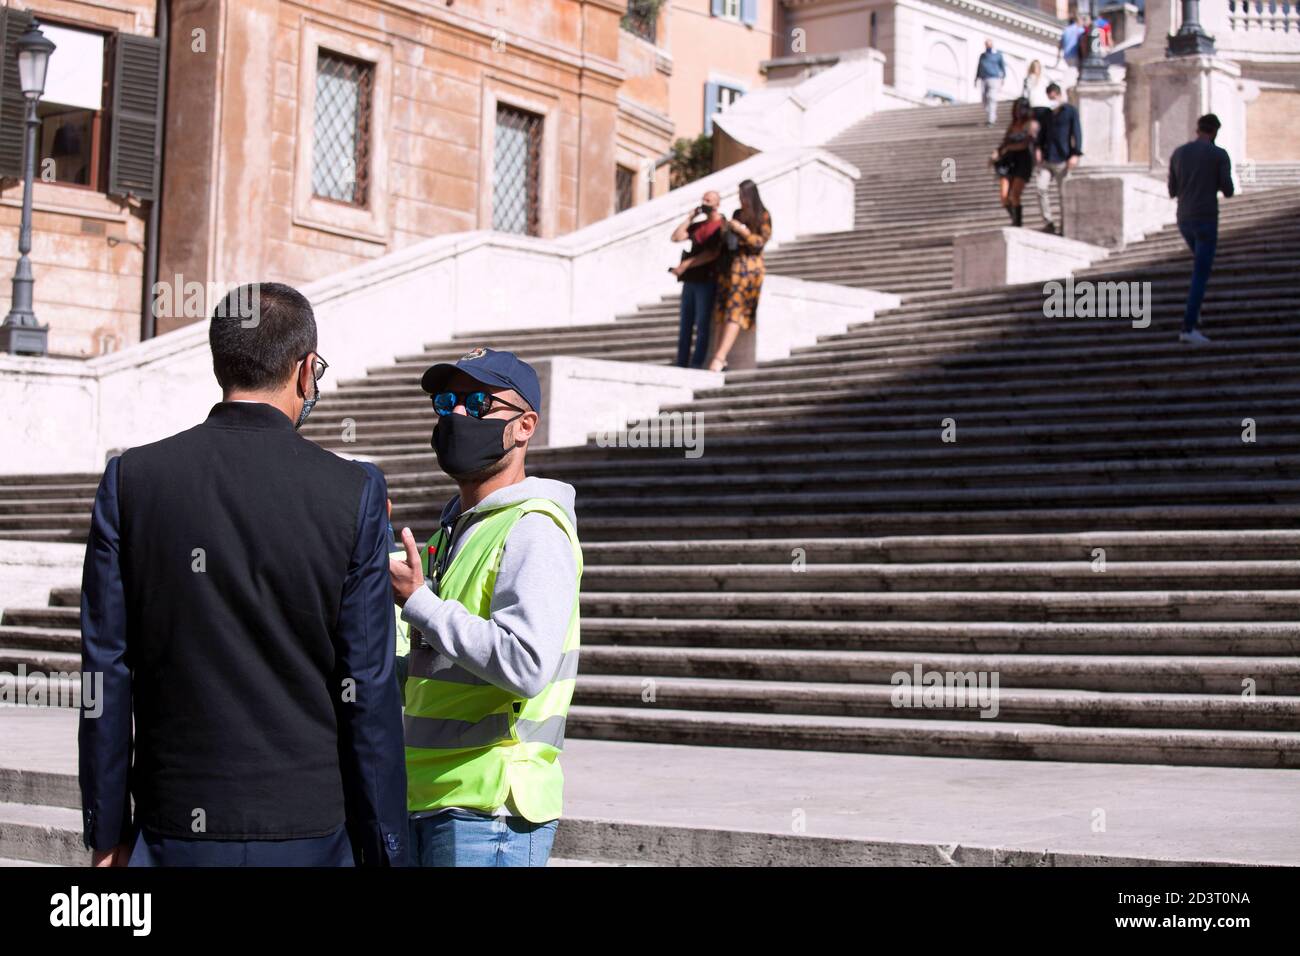 Rome, ITALY - 08 OCTOBER 2020: Today italian Prime Minister Giuseppe Conte orders to make the wearing of face masks in outdoor spaces mandatory due to the increase of Covid-19 cases in Italy. Stock Photo